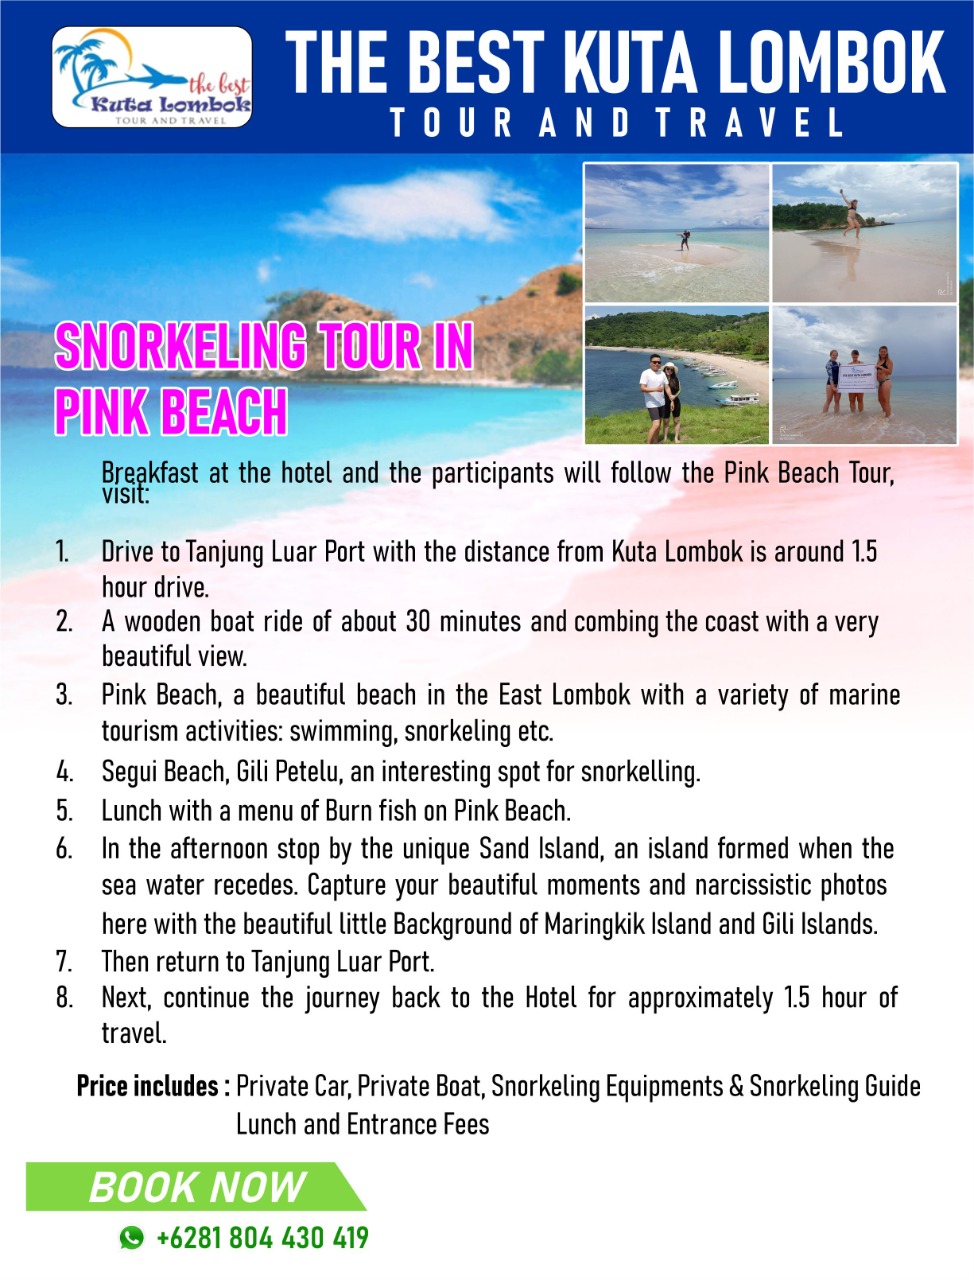 SNORKELING TOUR IN PINK BEACH